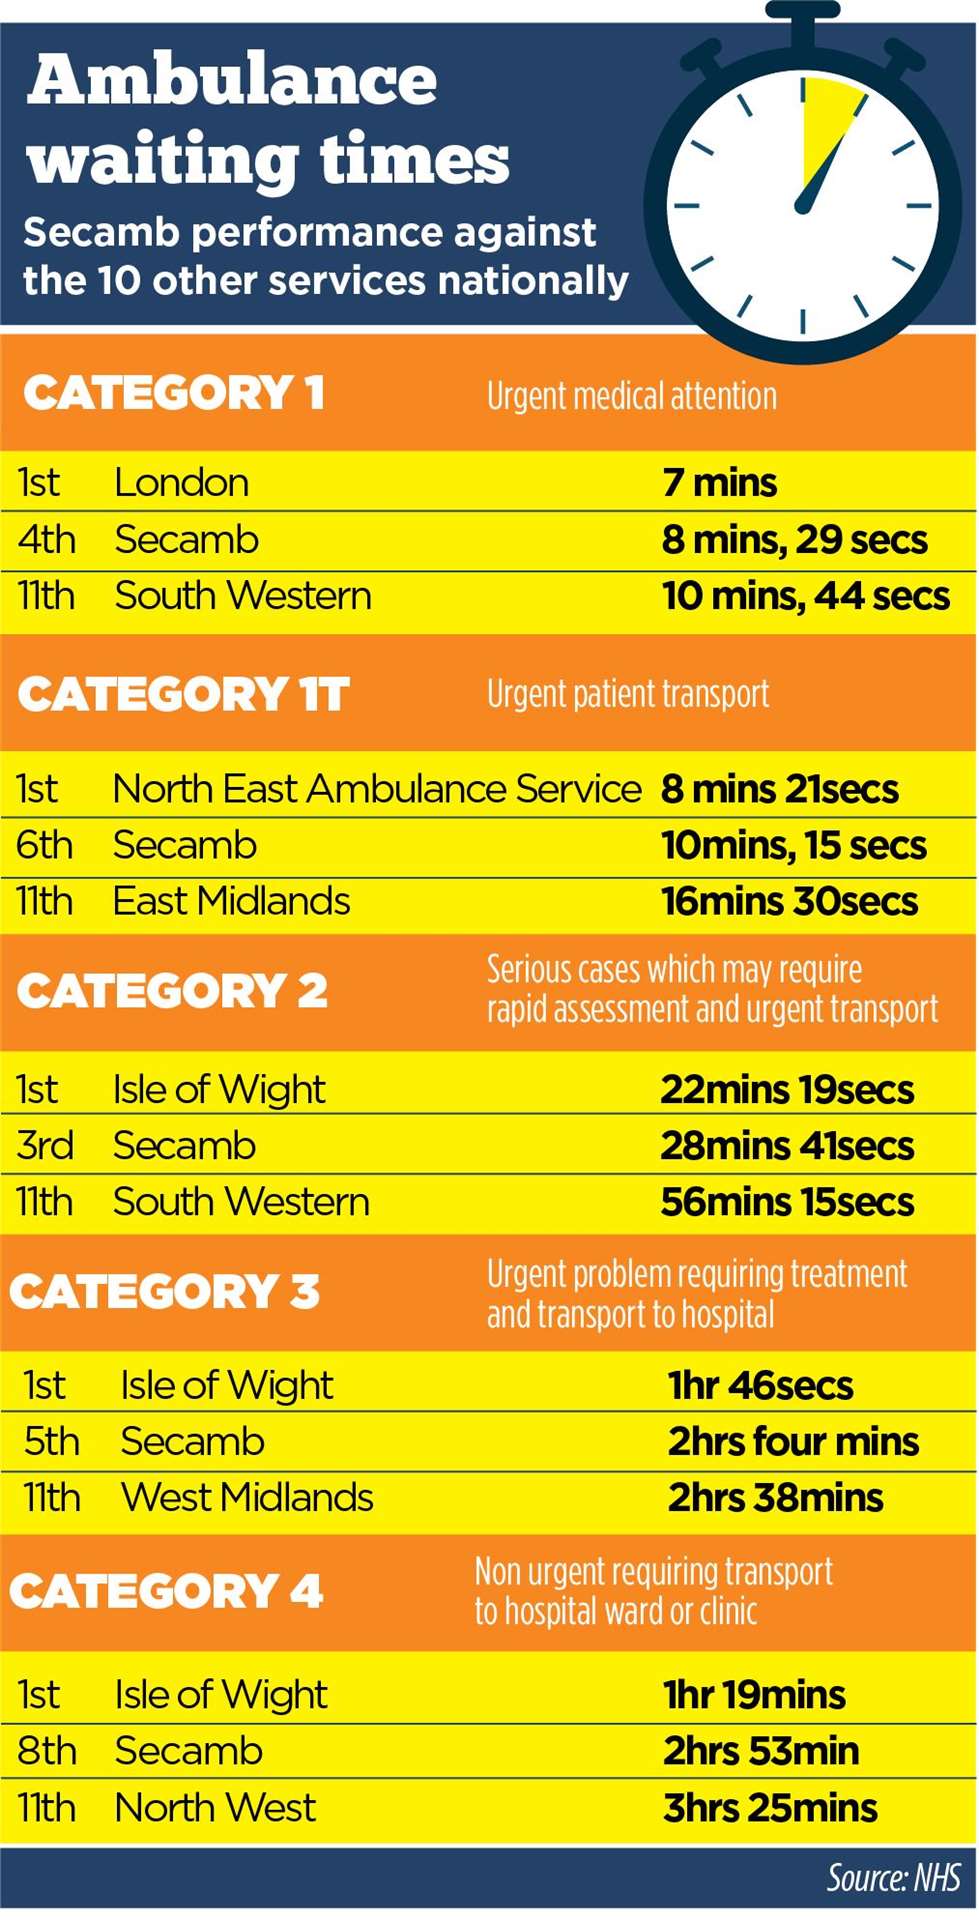 Ambulance waiting times for Secamb against other trusts in England